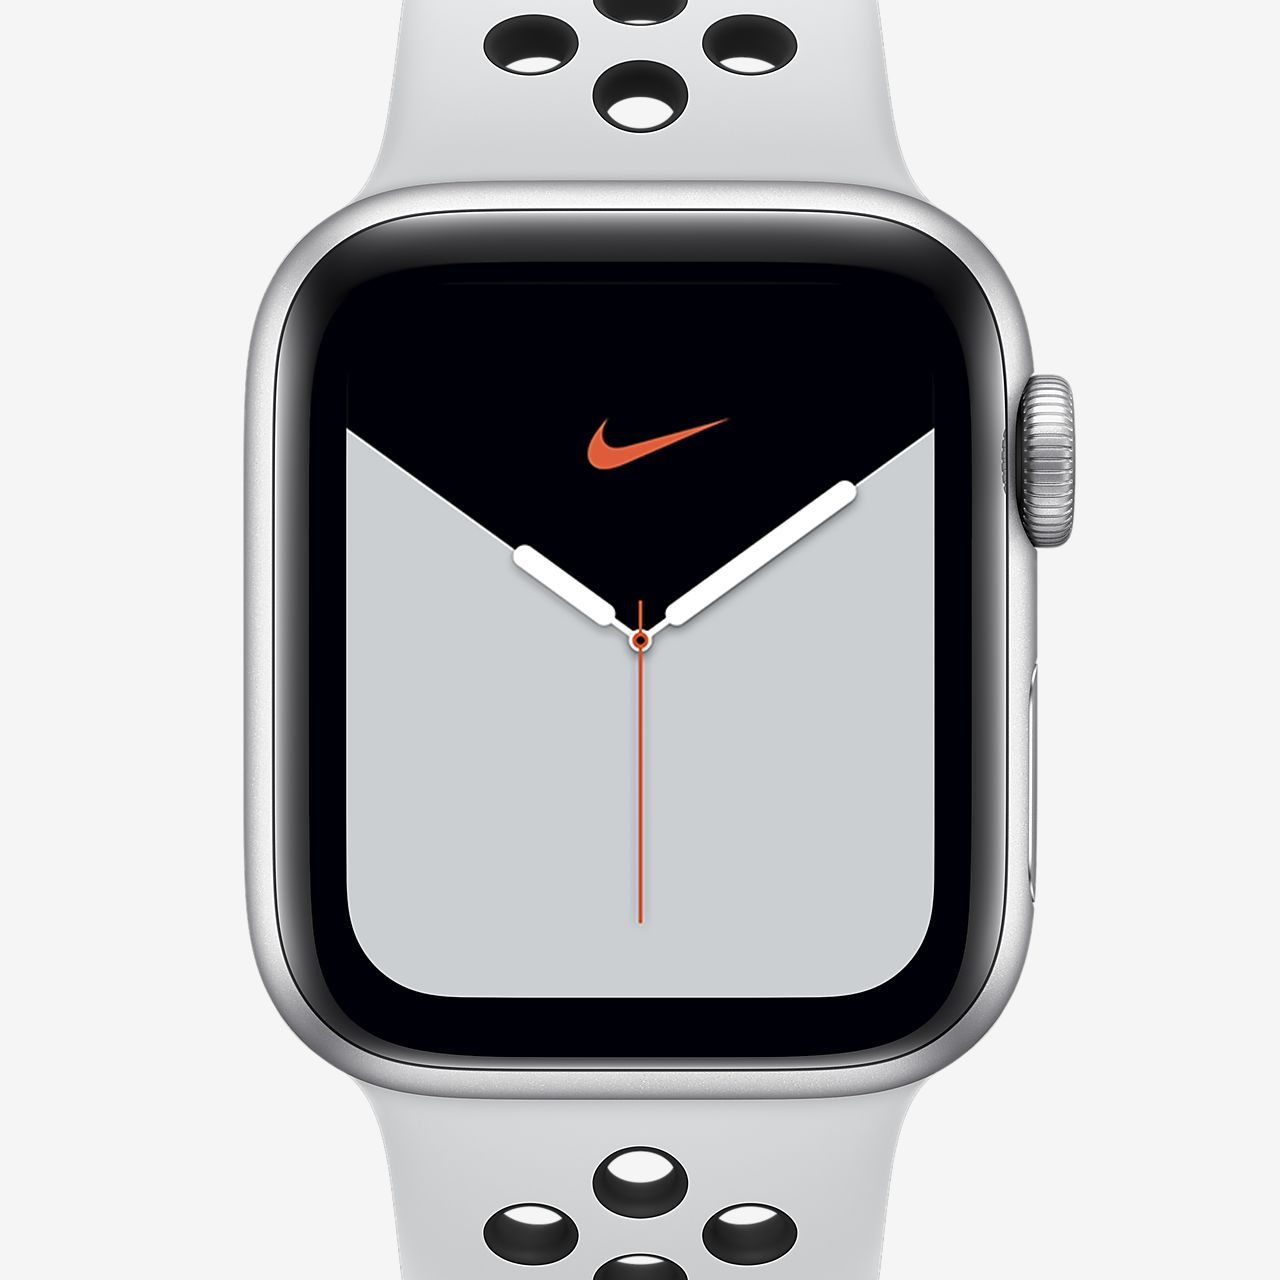 nike watches for men price